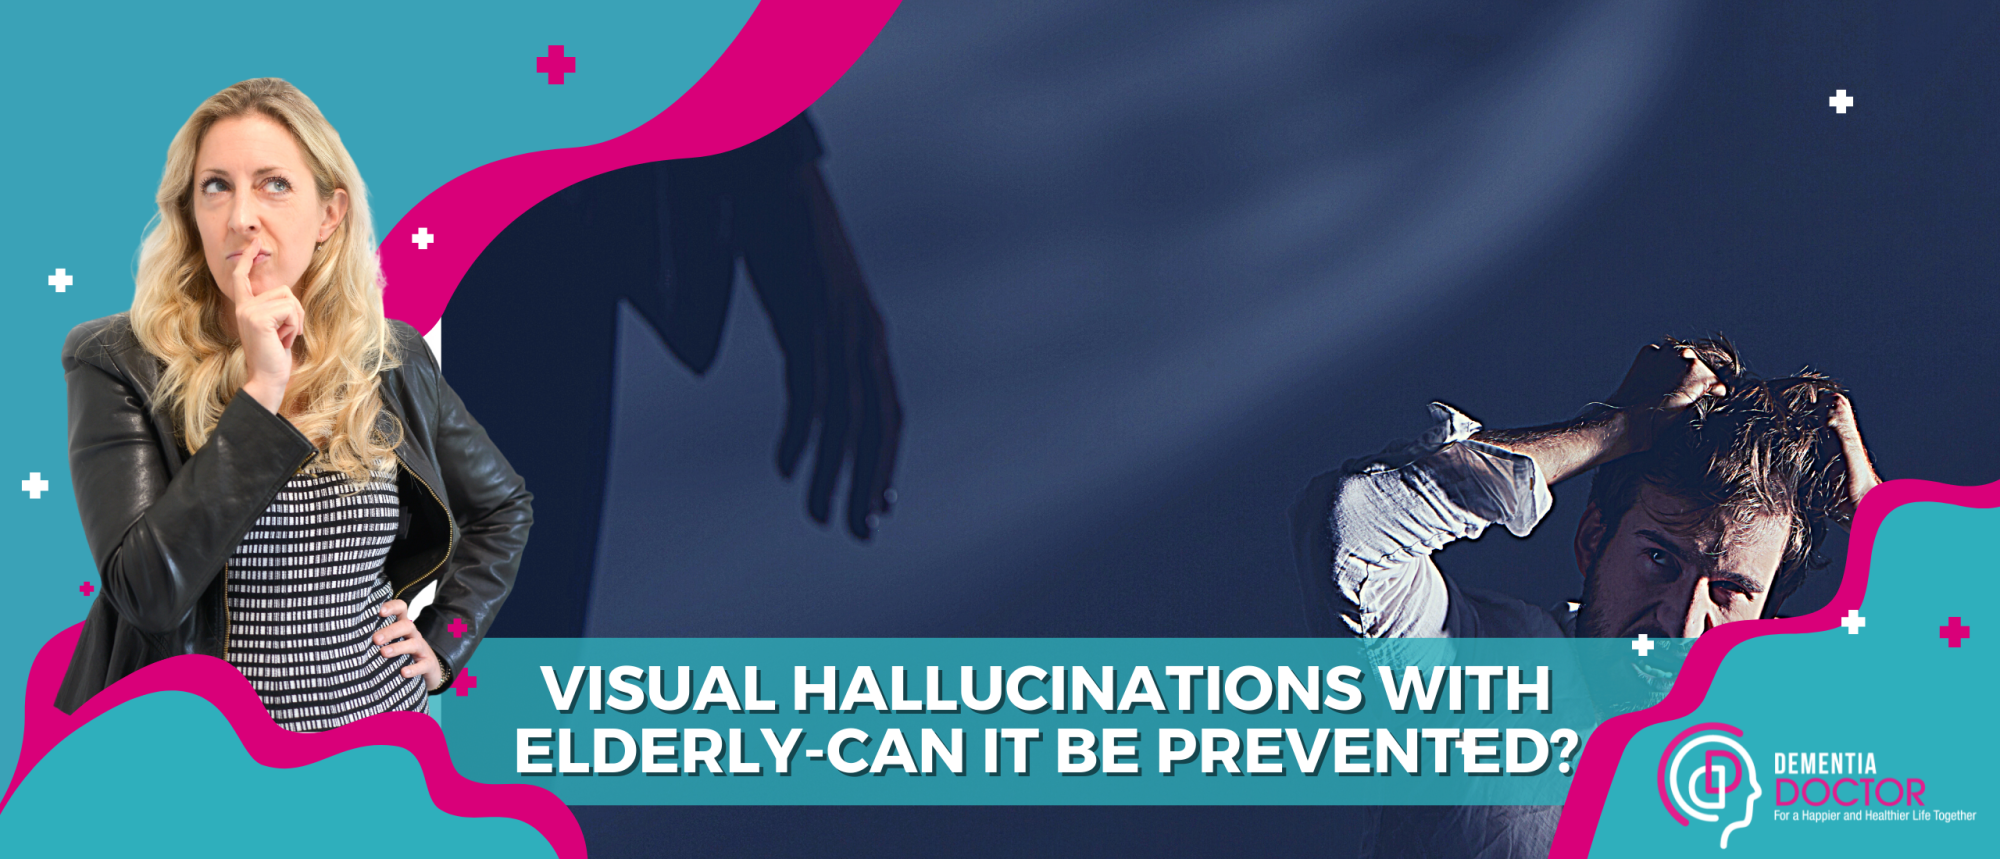 Blog Visual hallucinations with elderly. Can it be prevented?